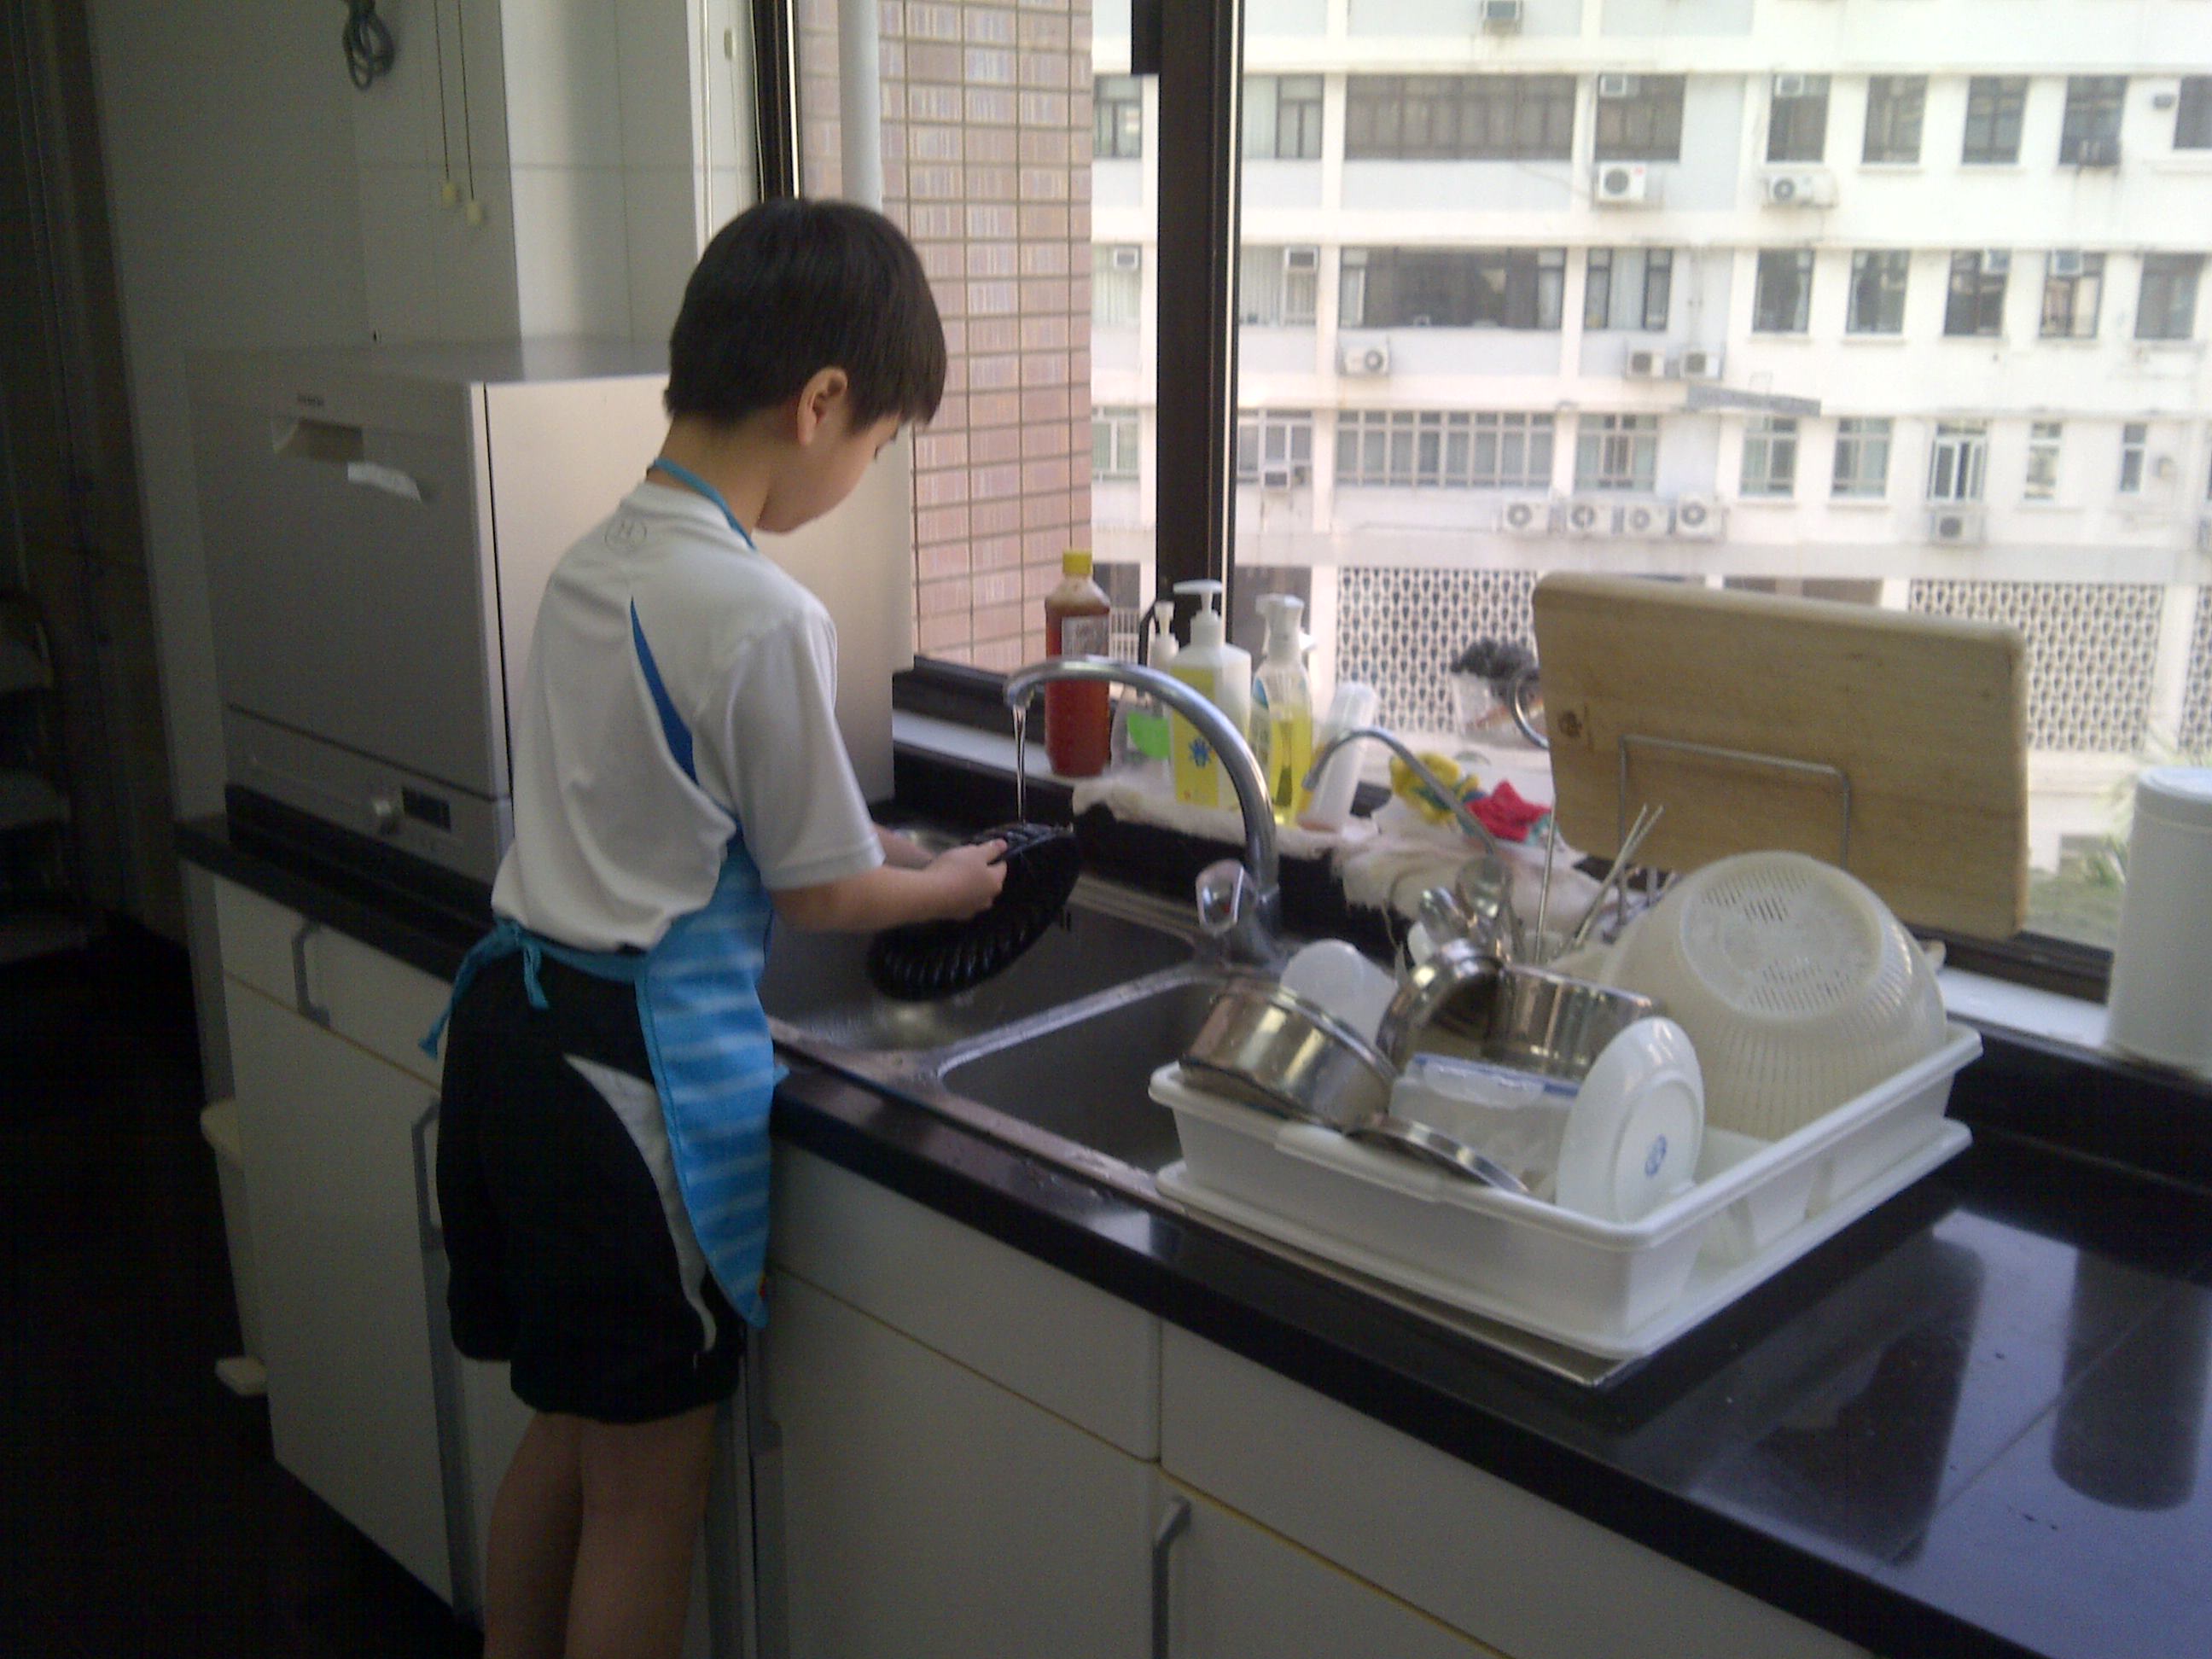 Conserving water while washing dishes